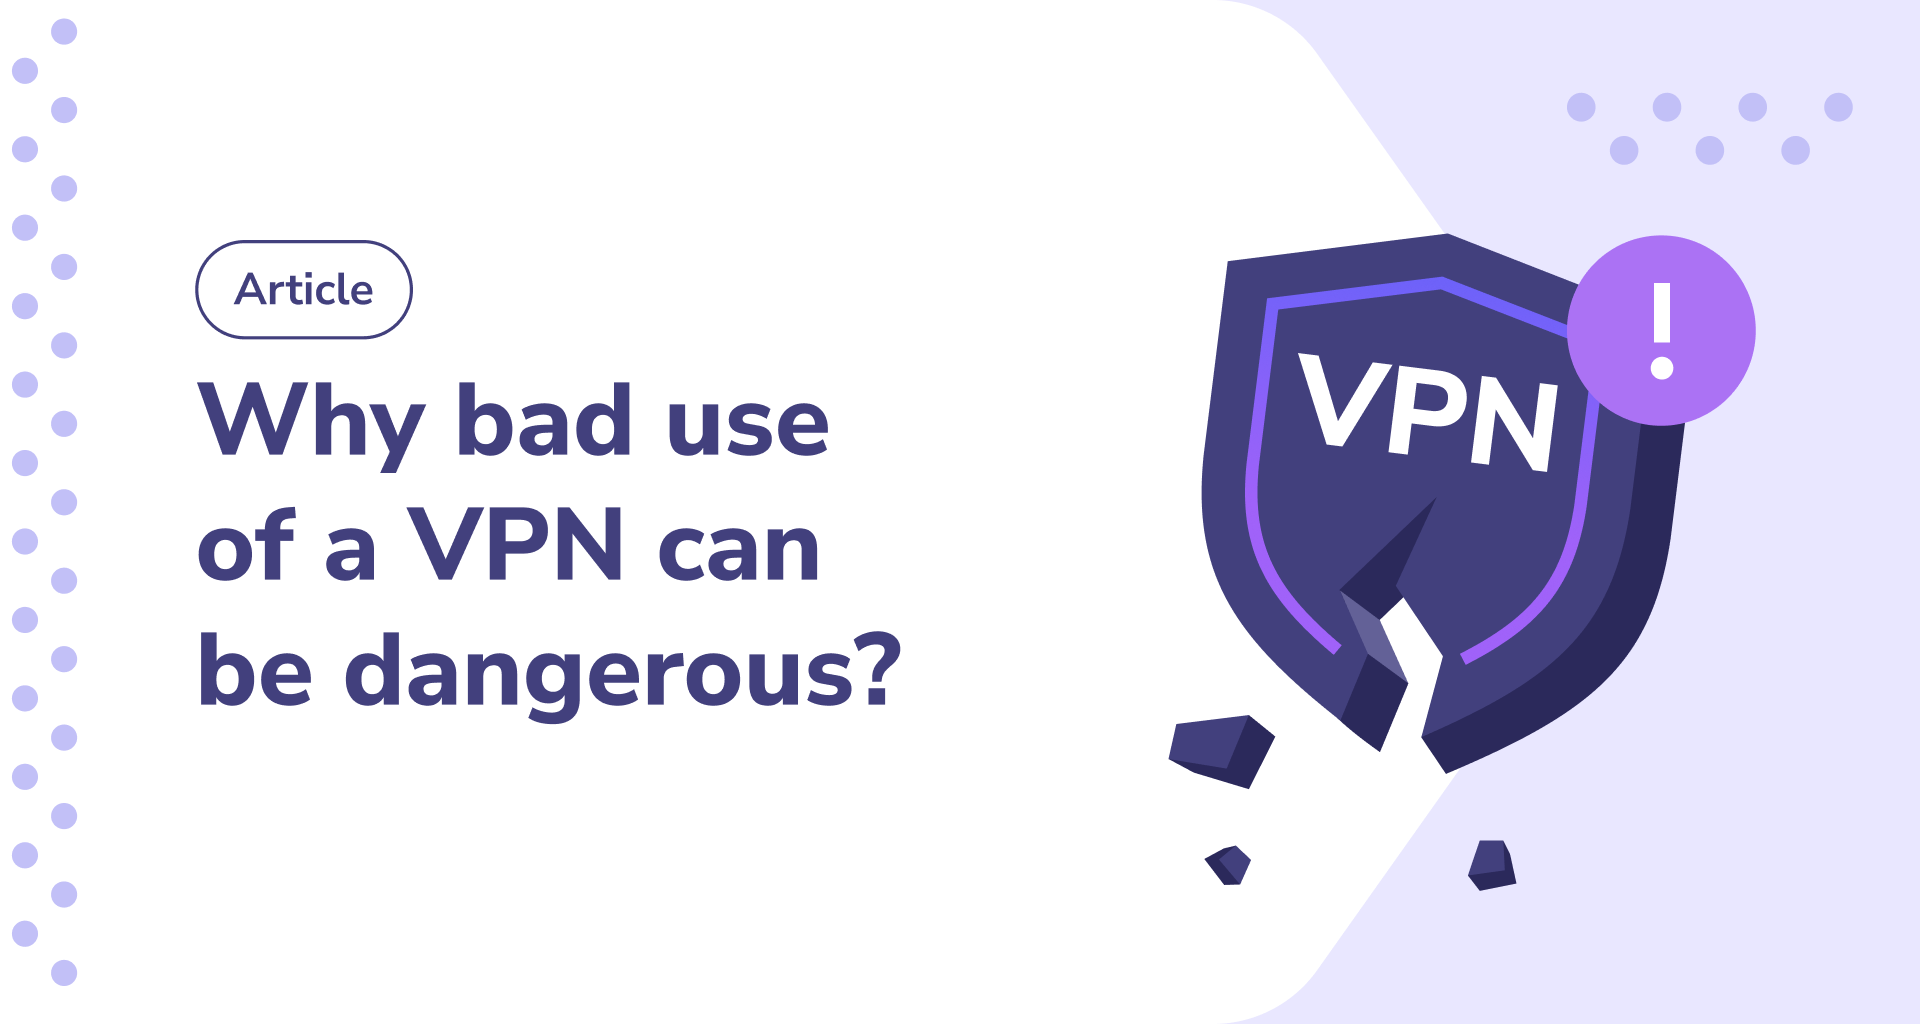 Why bad use of a VPN can be dangerous?